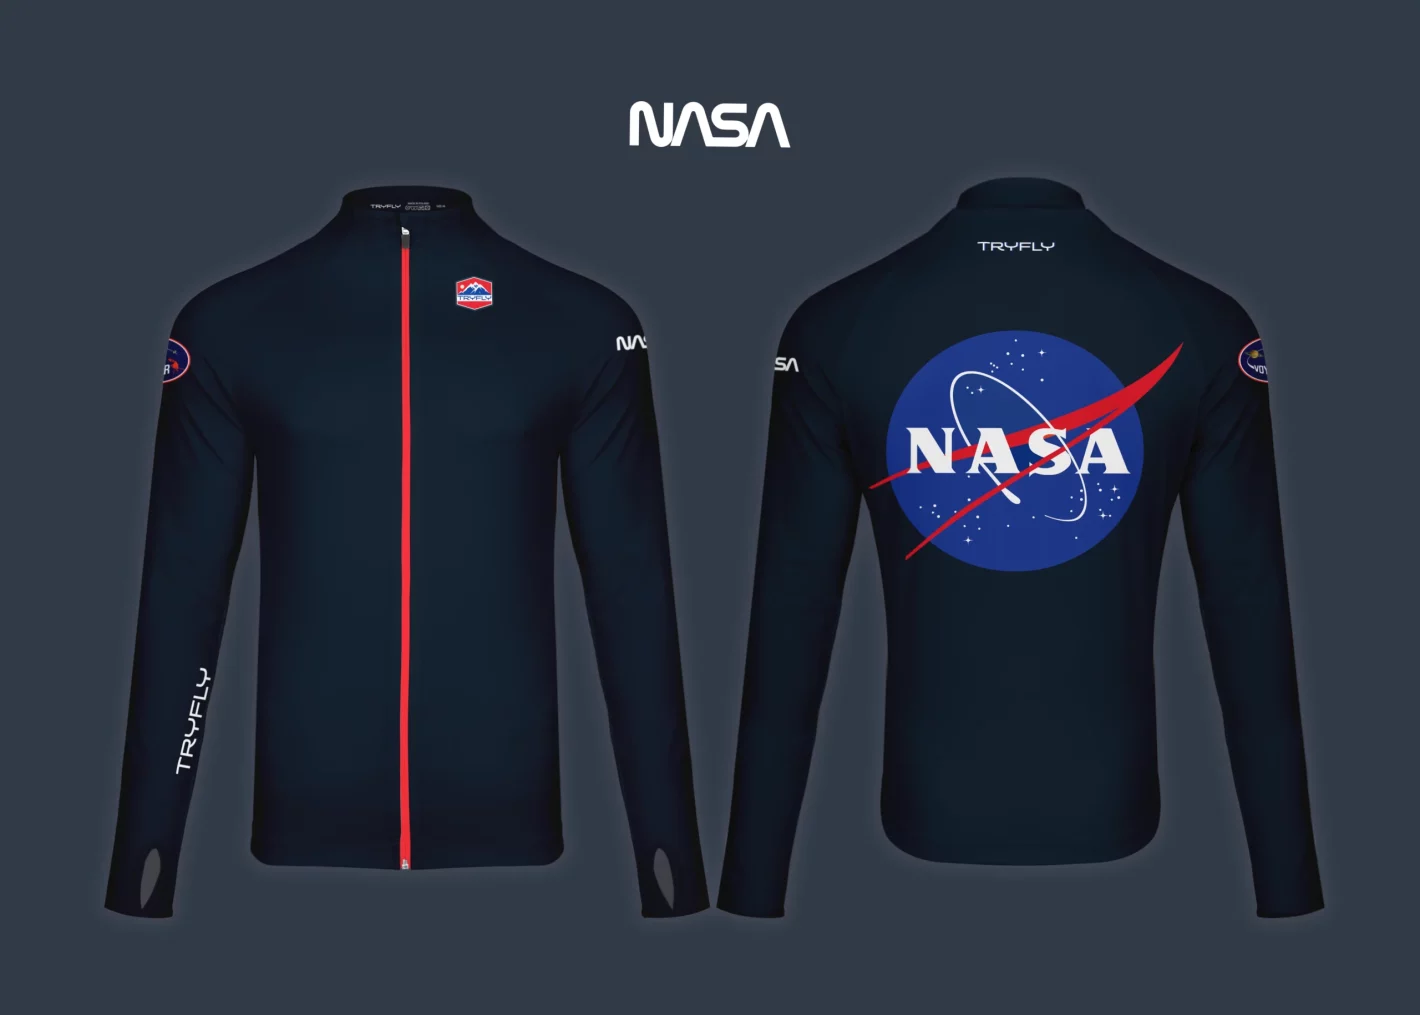 Introducing the Speedarm EVO - NASA Voyager, an advanced piece of apparel engineered for the ambitious adventurer and outdoor enthusiast